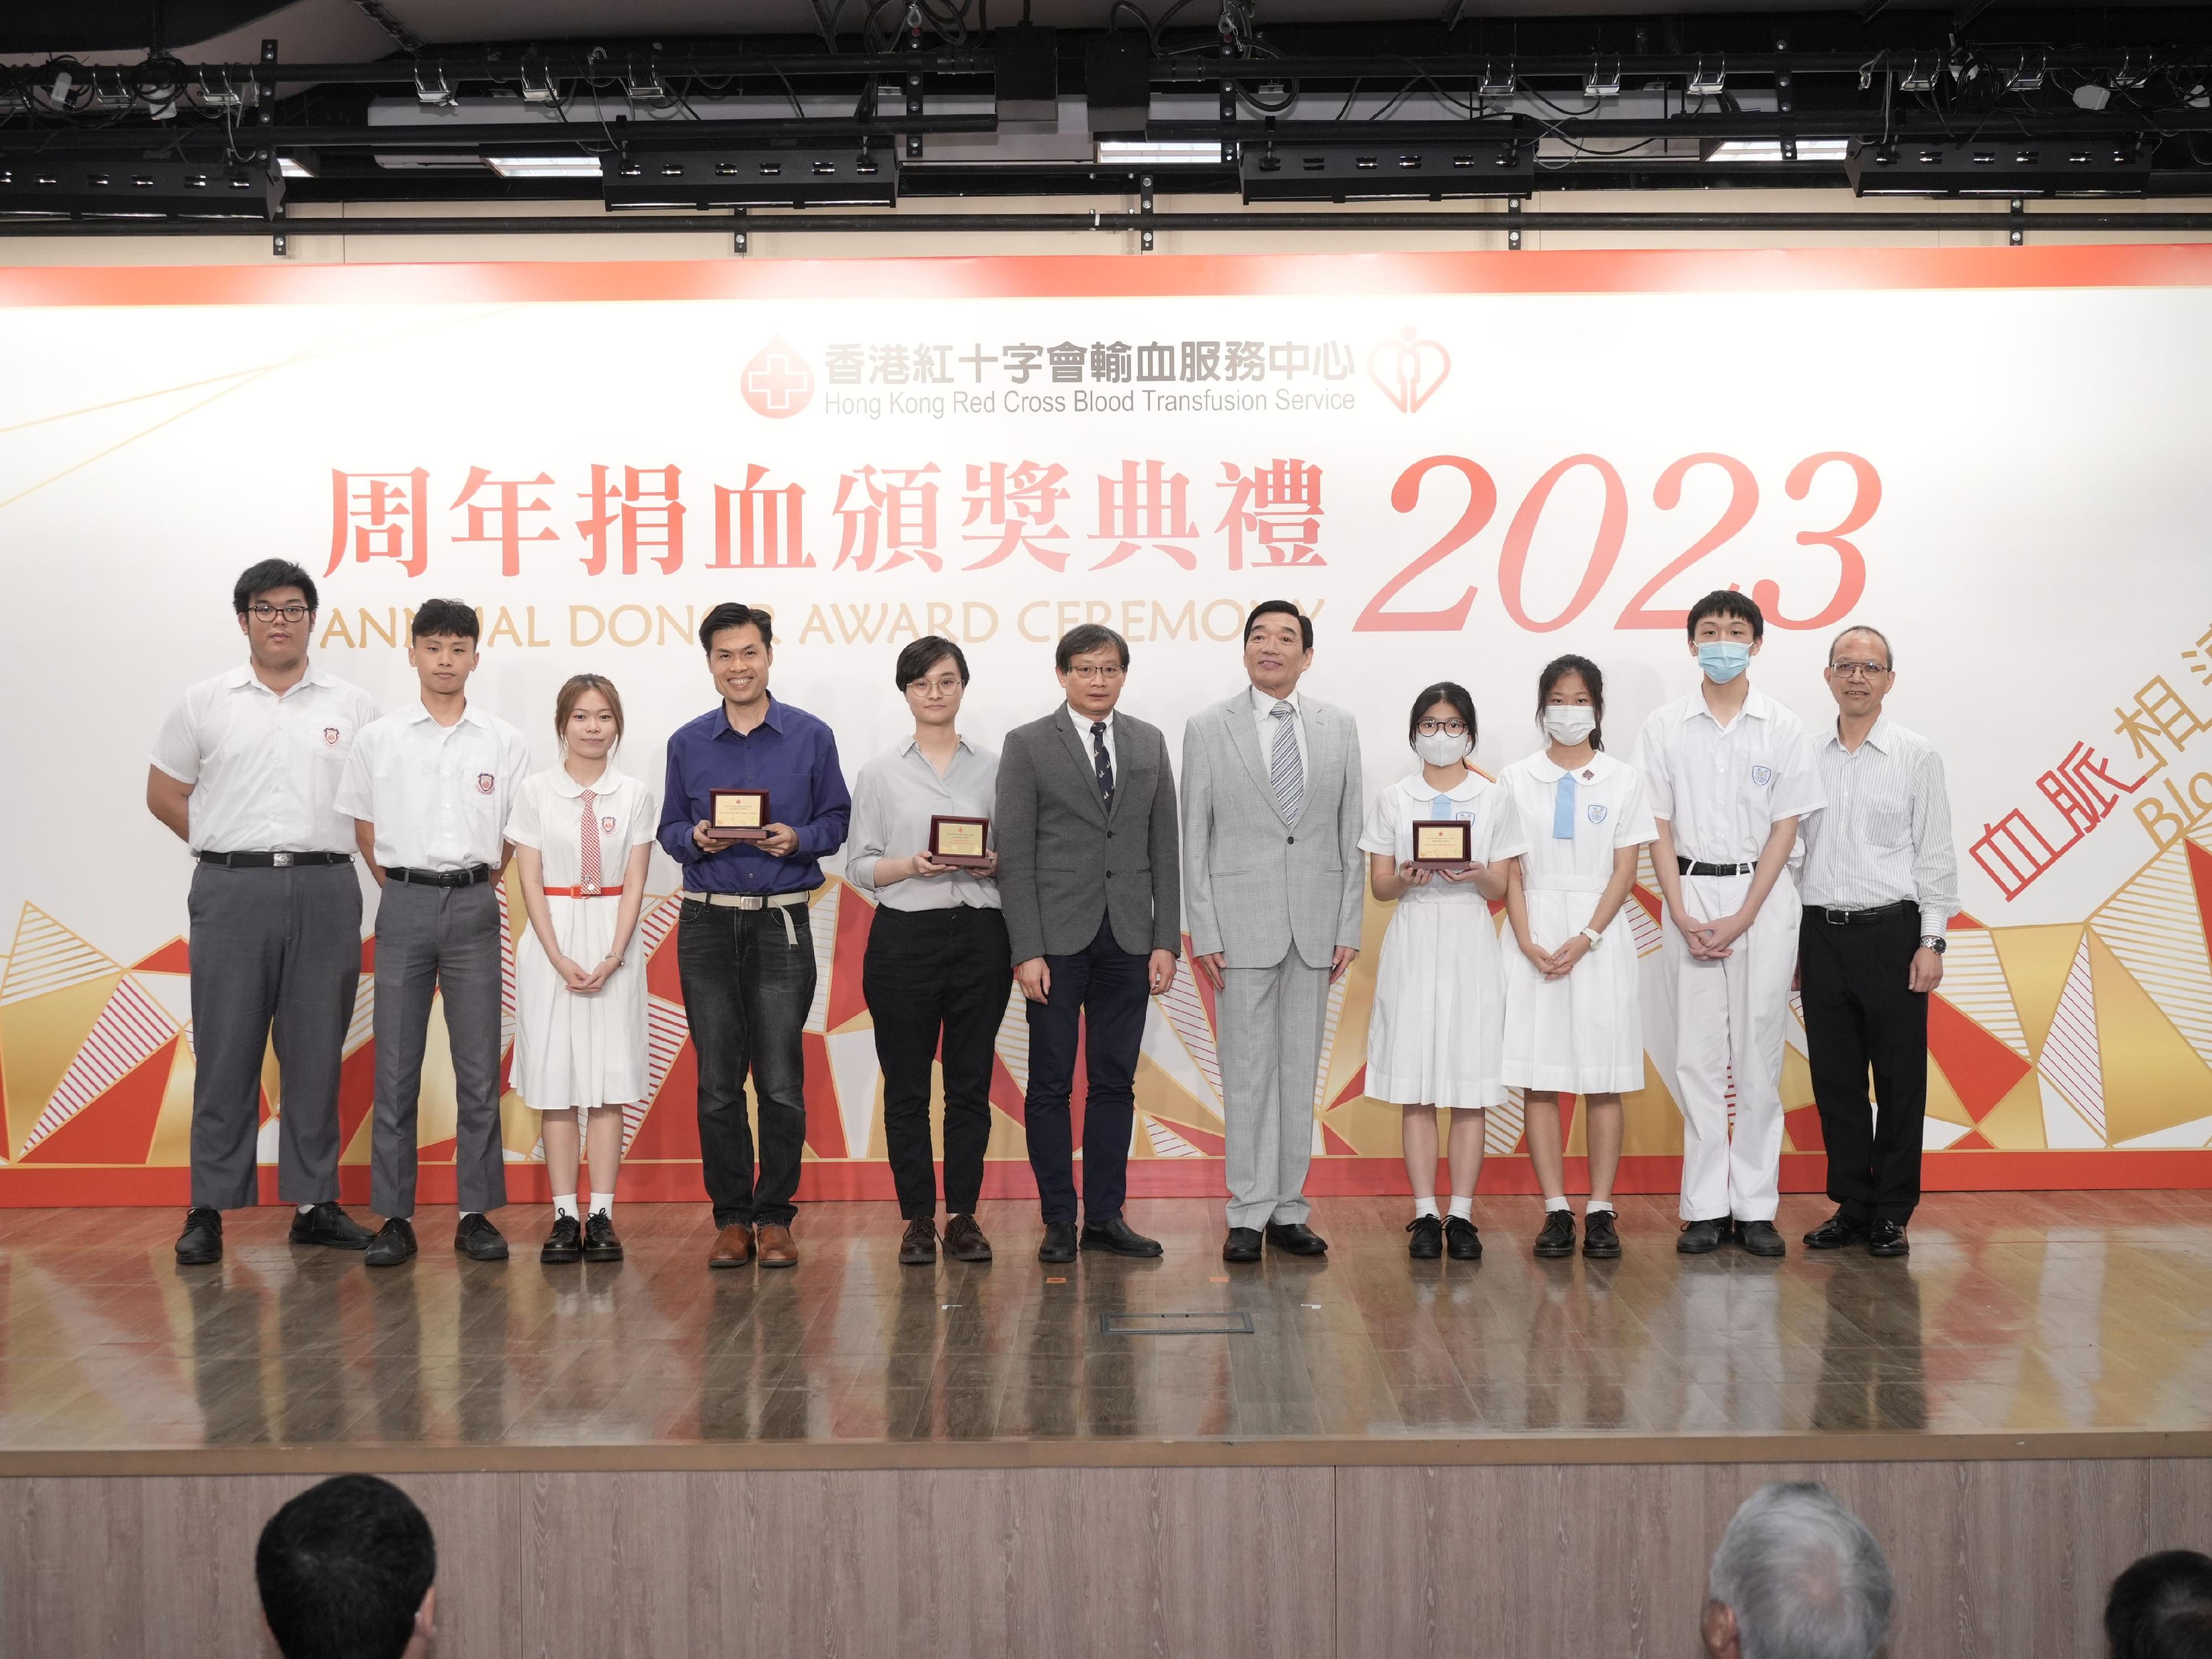 The Hong Kong Red Cross Blood Transfusion Service today (June 10) held its Annual Donor Award Ceremony to commend outstanding blood donors. Photo shows the Chairman of the Hospital Authority, Mr Henry Fan (fifth right), presenting the Elite Partnership Award - Secondary School to school representatives for their active participation in campus blood drives.